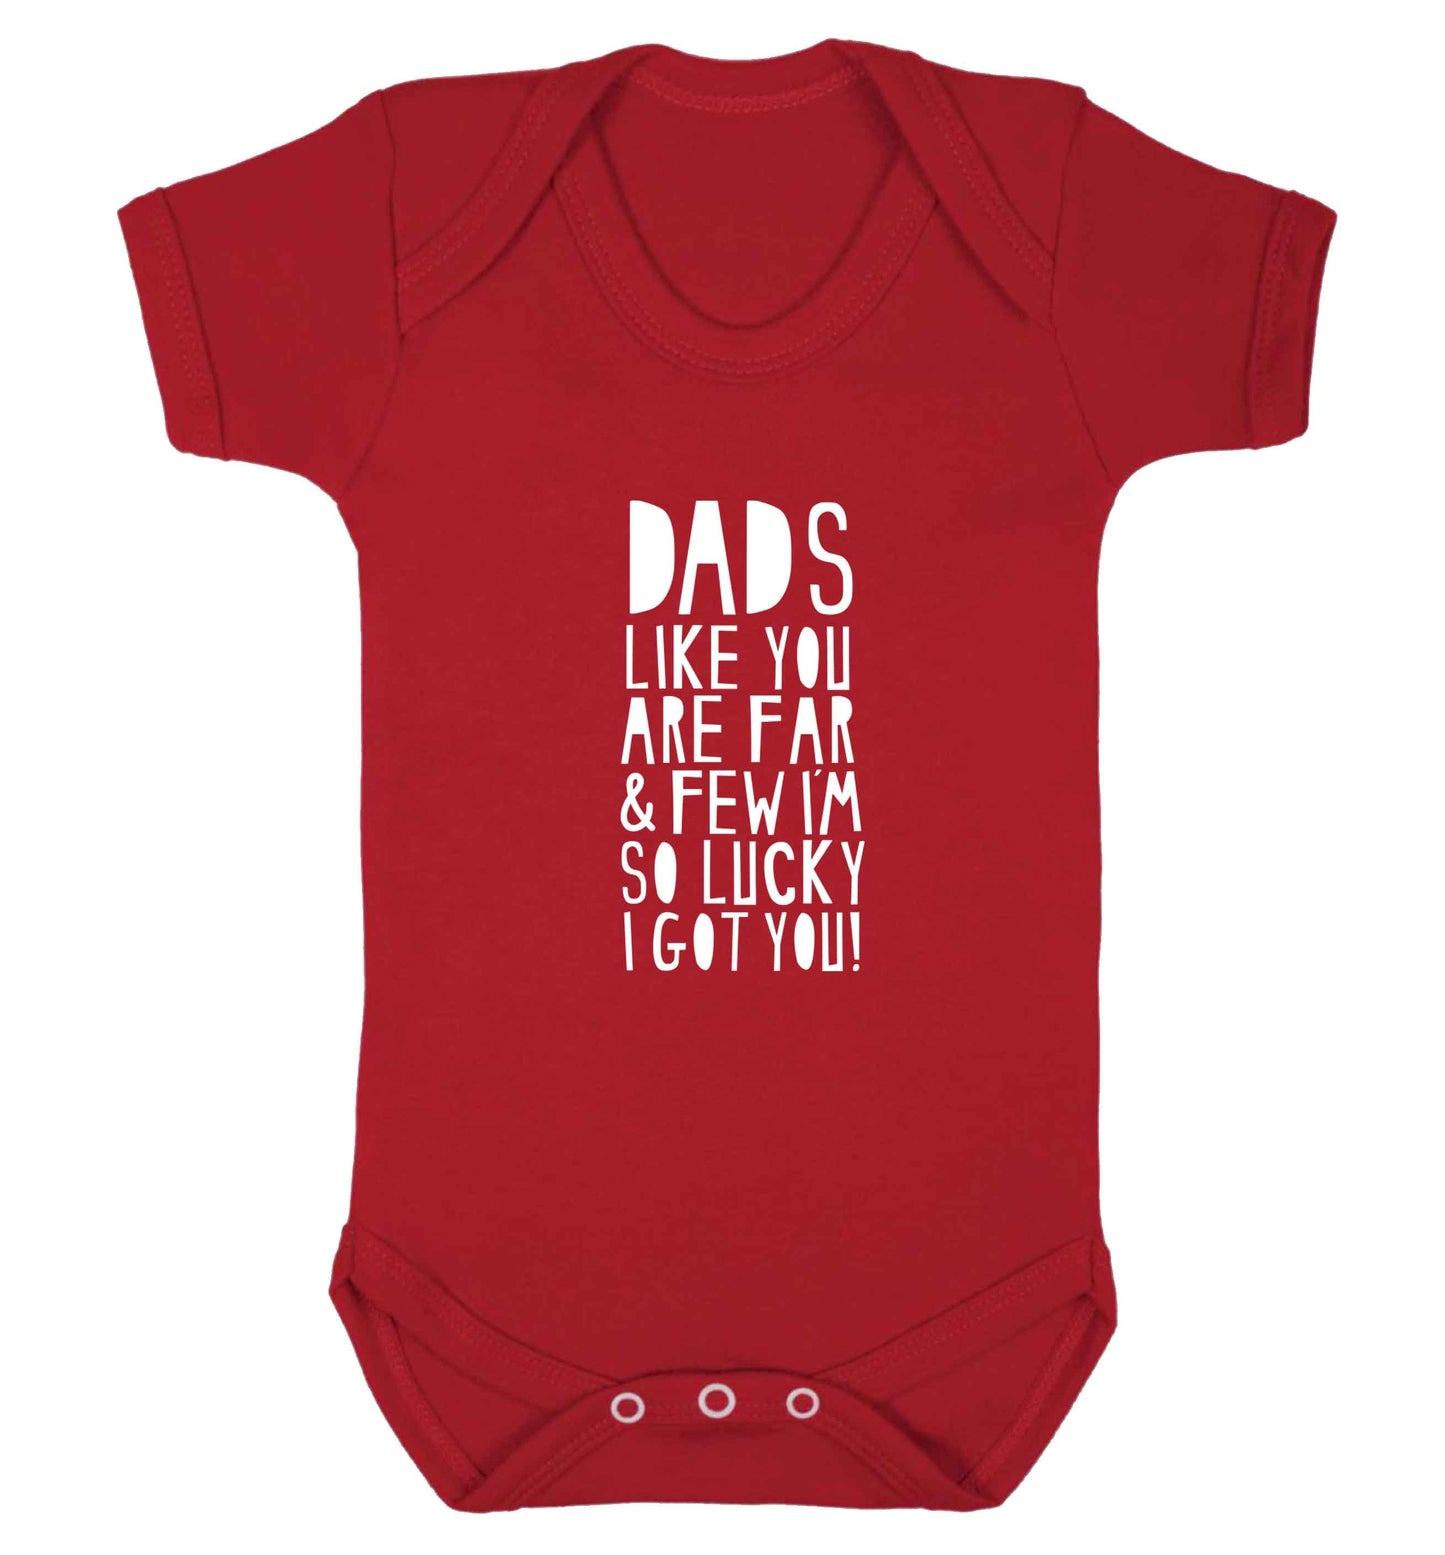 Dads like you are far and few I'm so luck I got you! baby vest red 18-24 months